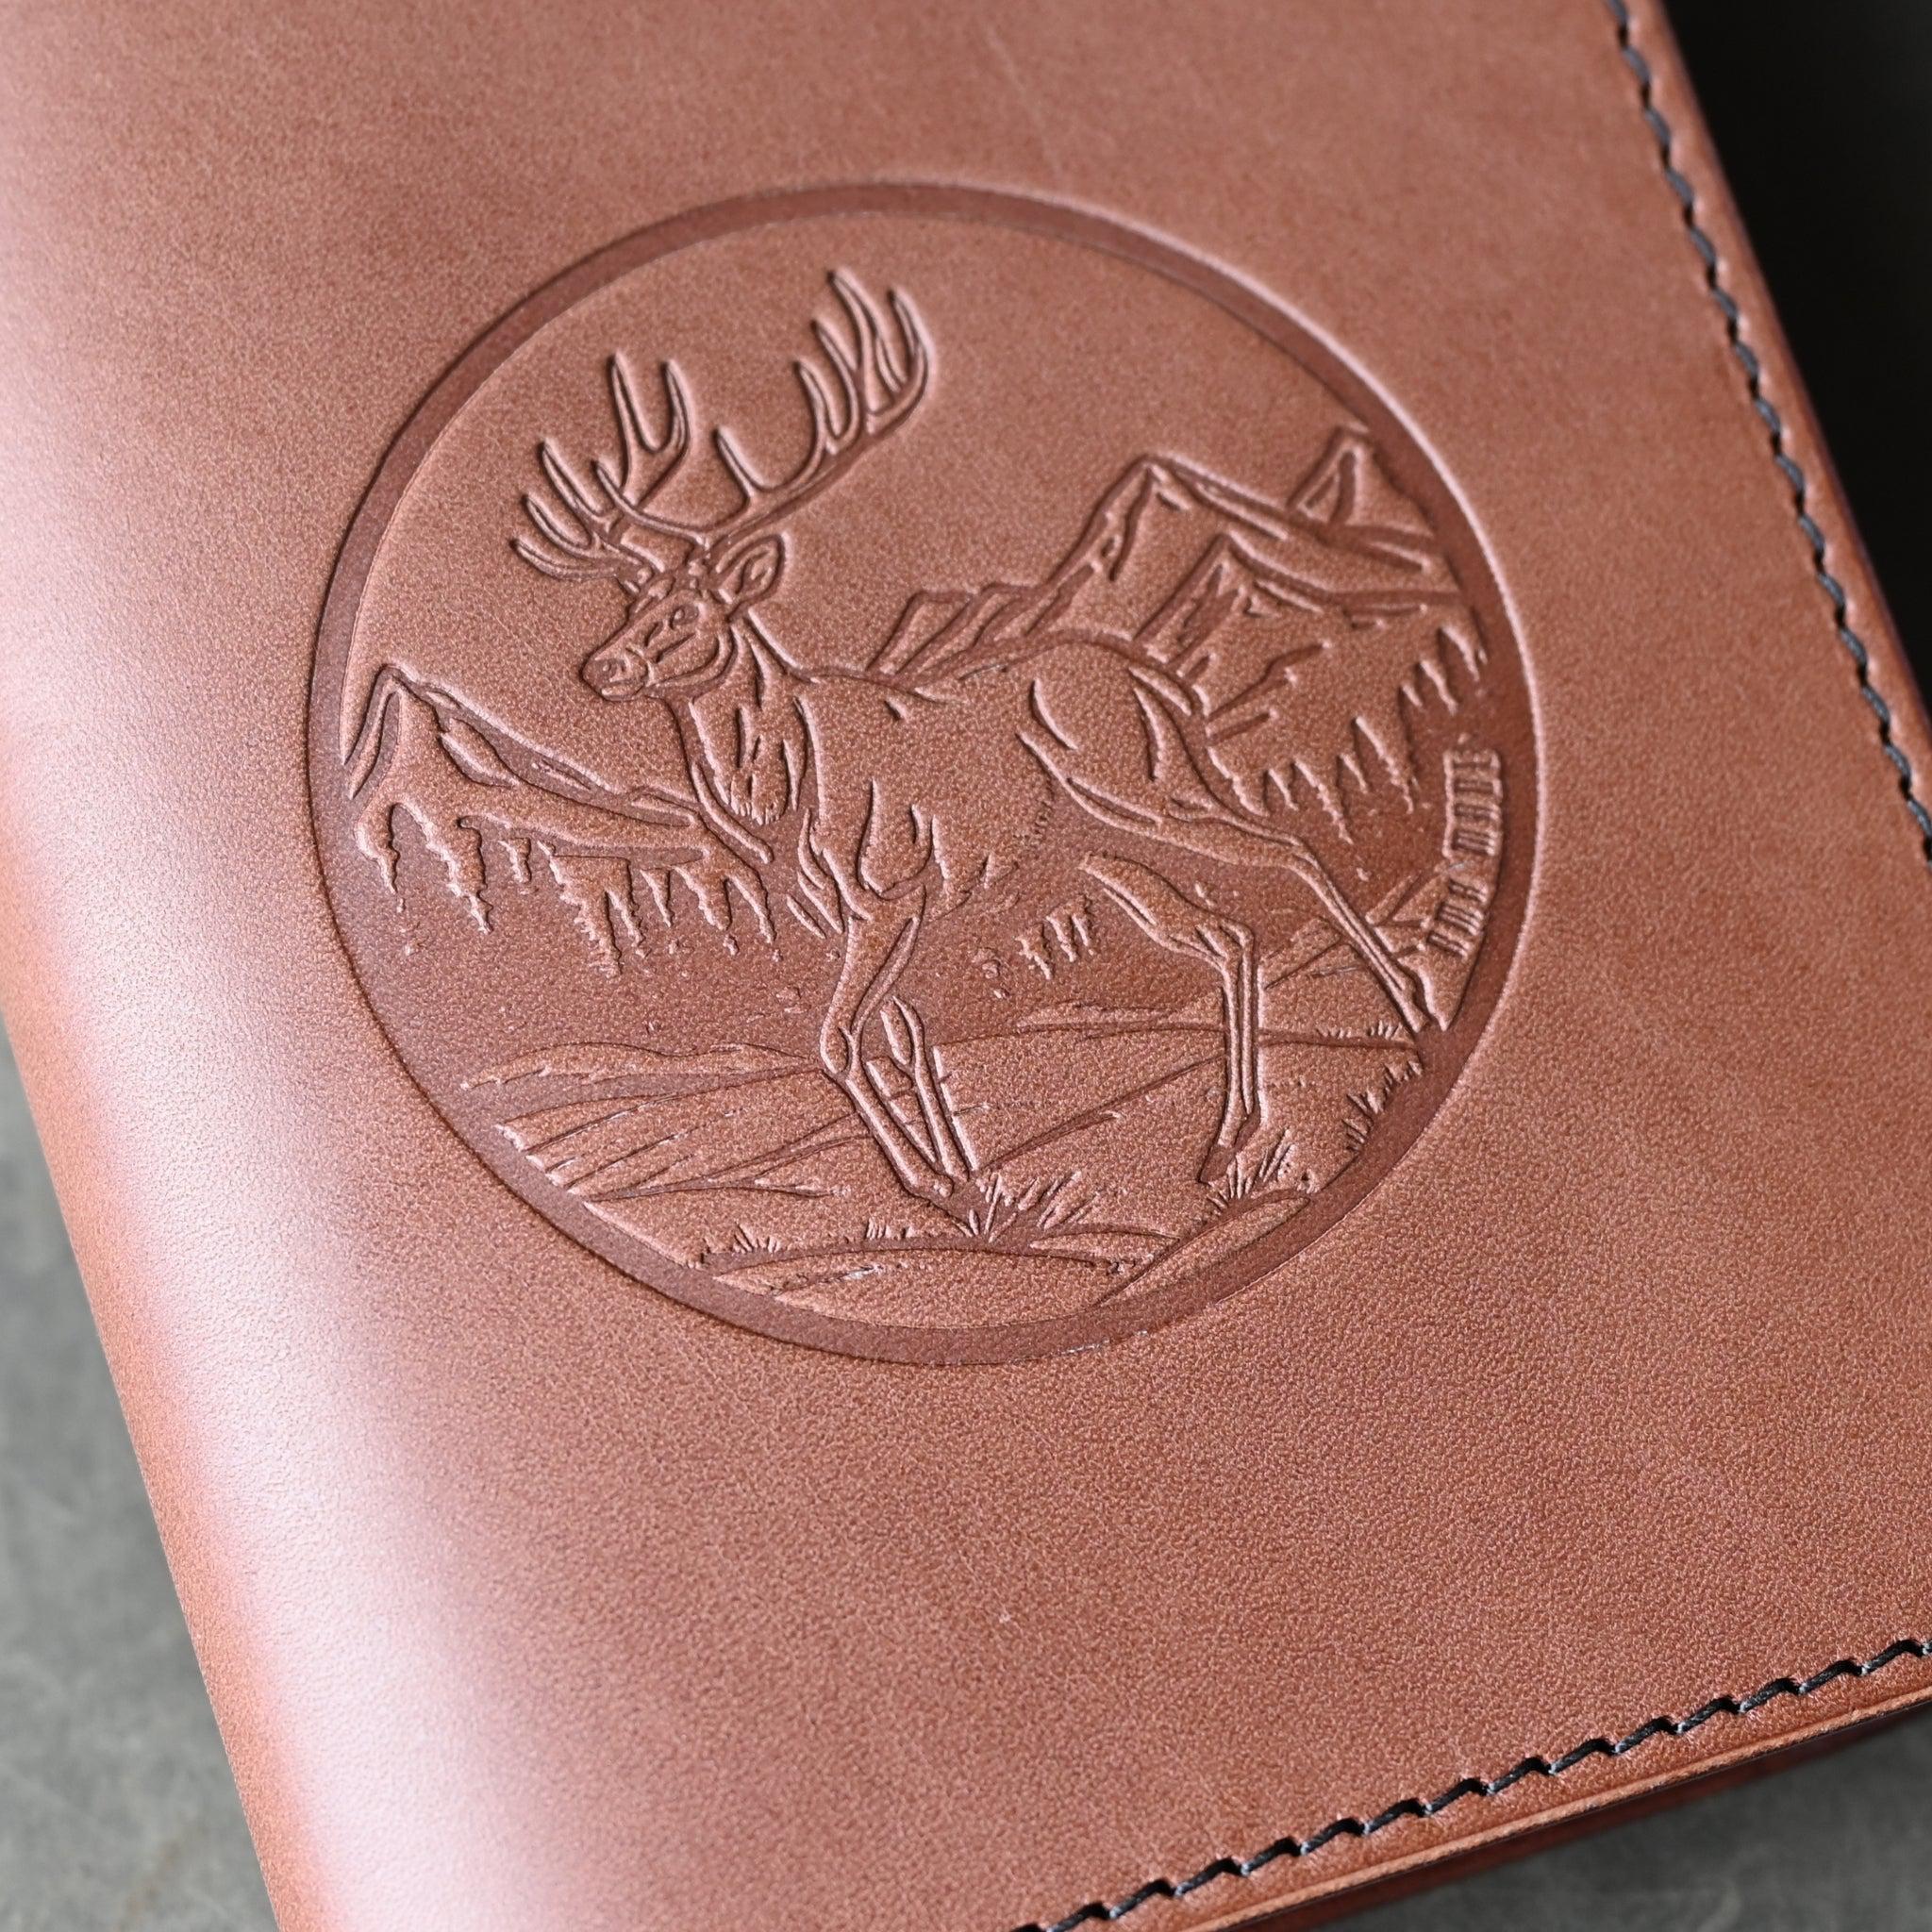 Ready To Ship A6 Leather Notebook Cover Chocolate Brown w/ Deer Stamp